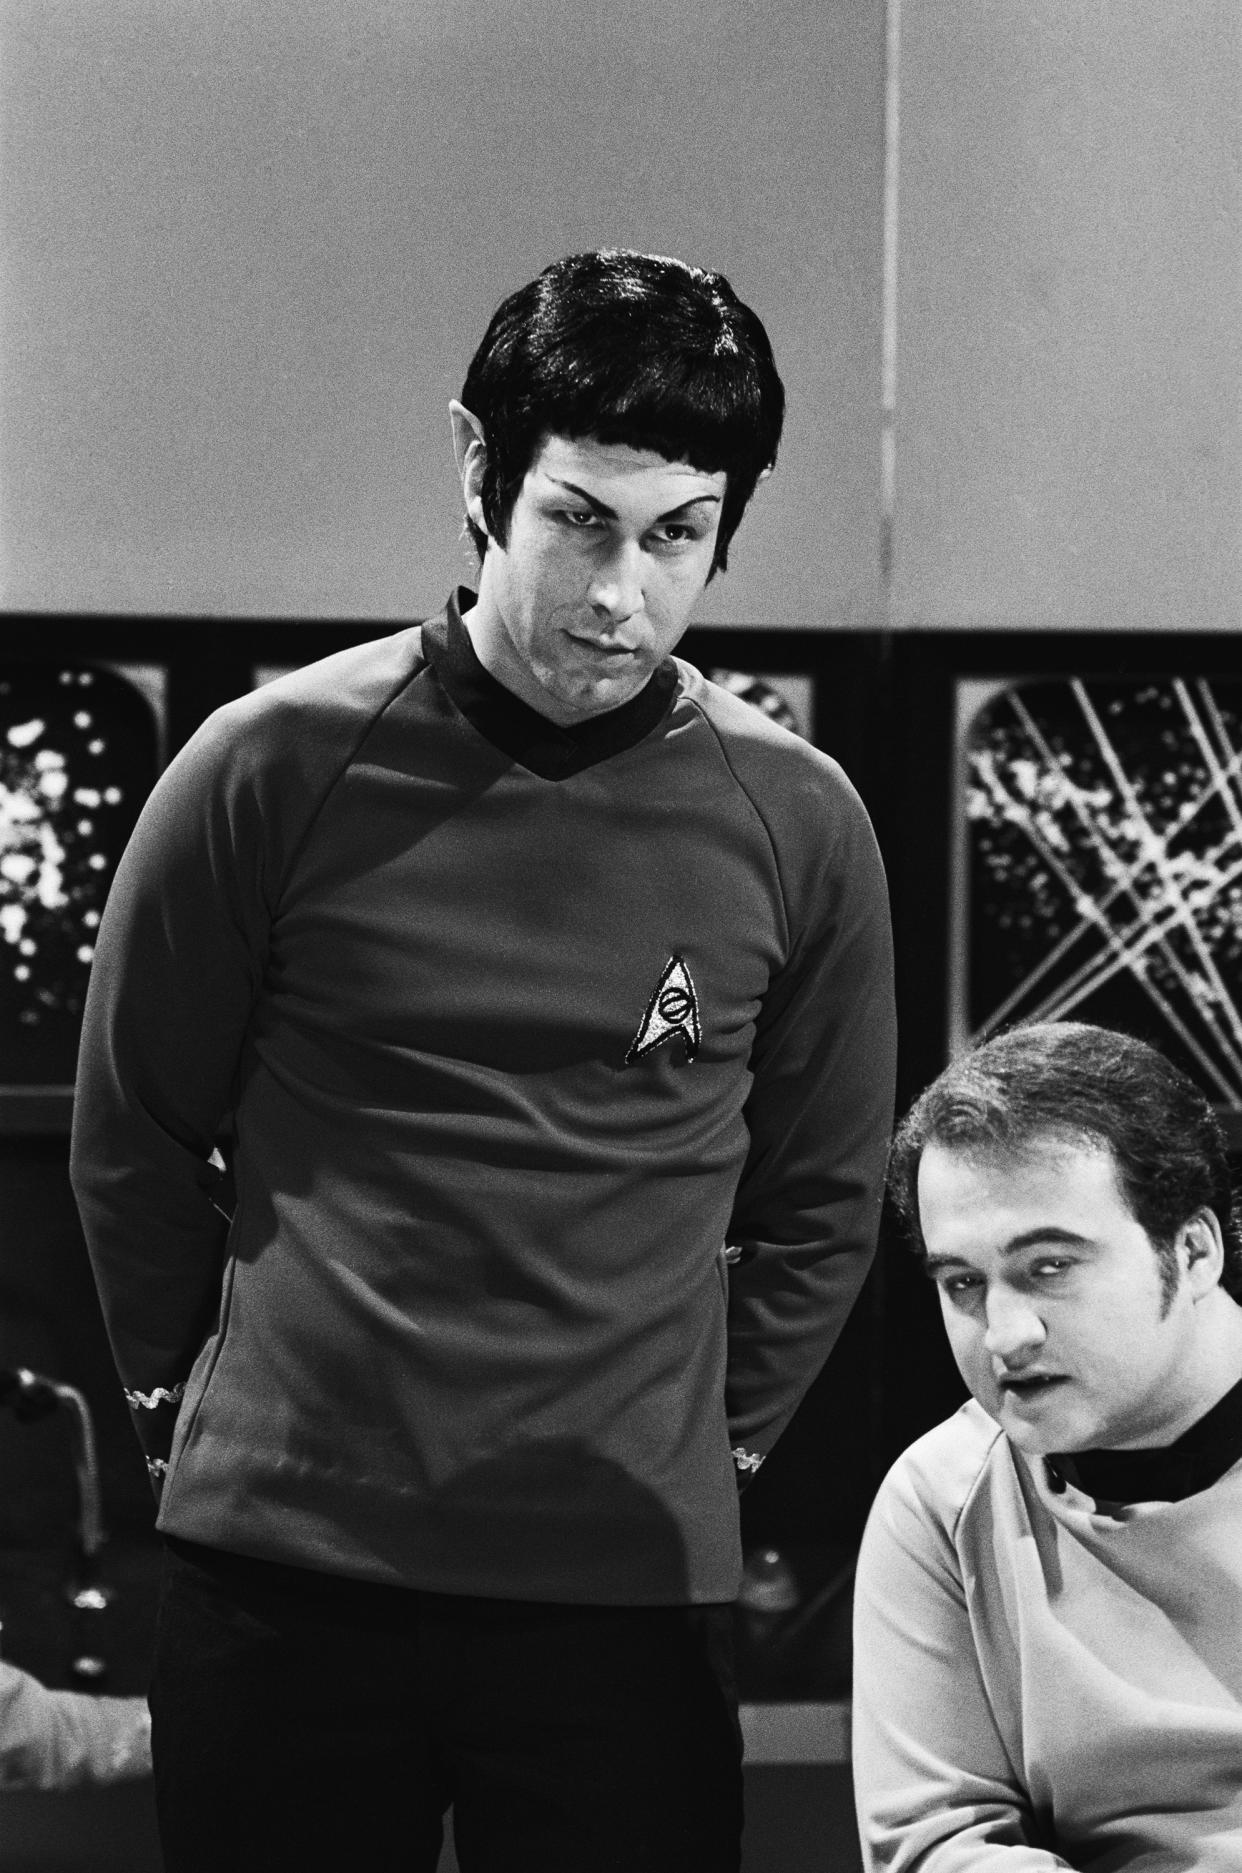 SATURDAY NIGHT LIVE -- Episode 22 -- Air Date 05/29/1976 -- Pictured: (l-r) Chevy Chase as Leonard Nimoy, Mr. Spock, John Belushi as William Shatner, Captain Kirk during 